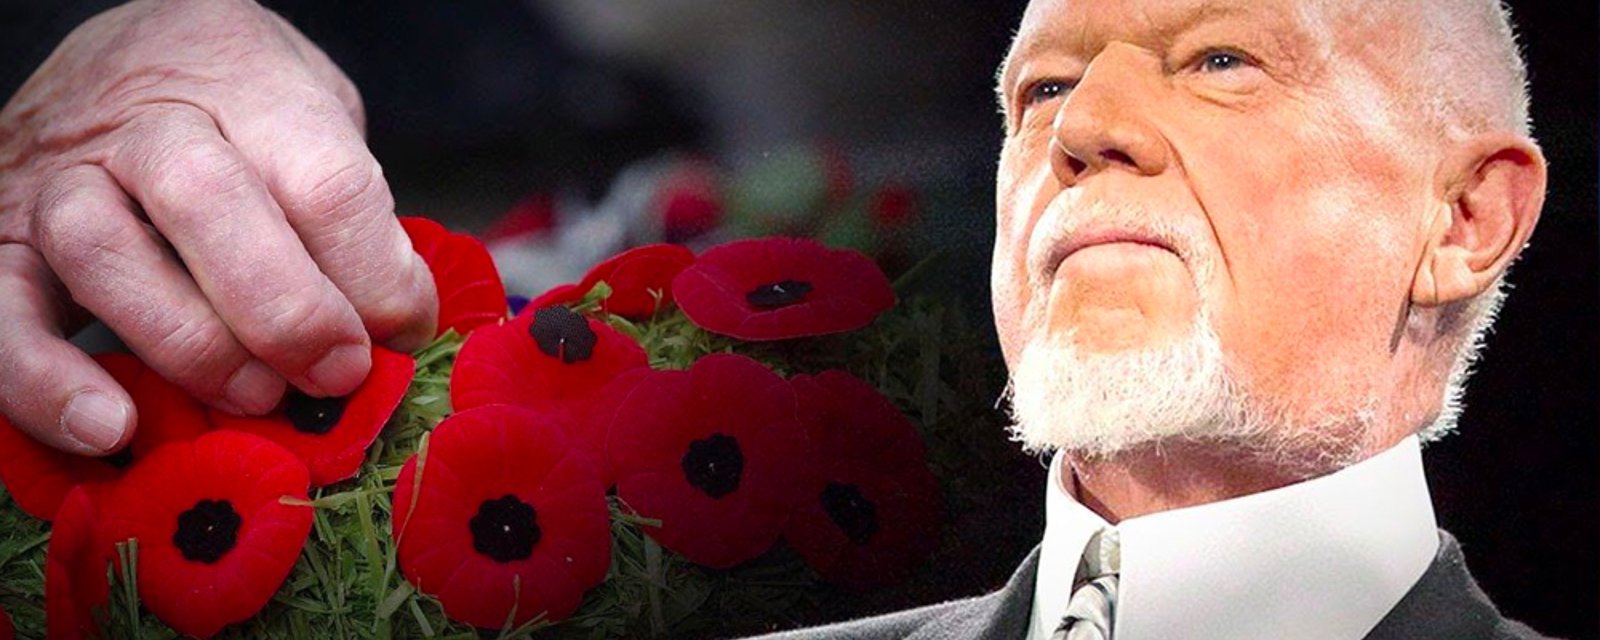 Don Cherry resurfaces in the hockey world yesterday on Remembrance Day / Veterans Day